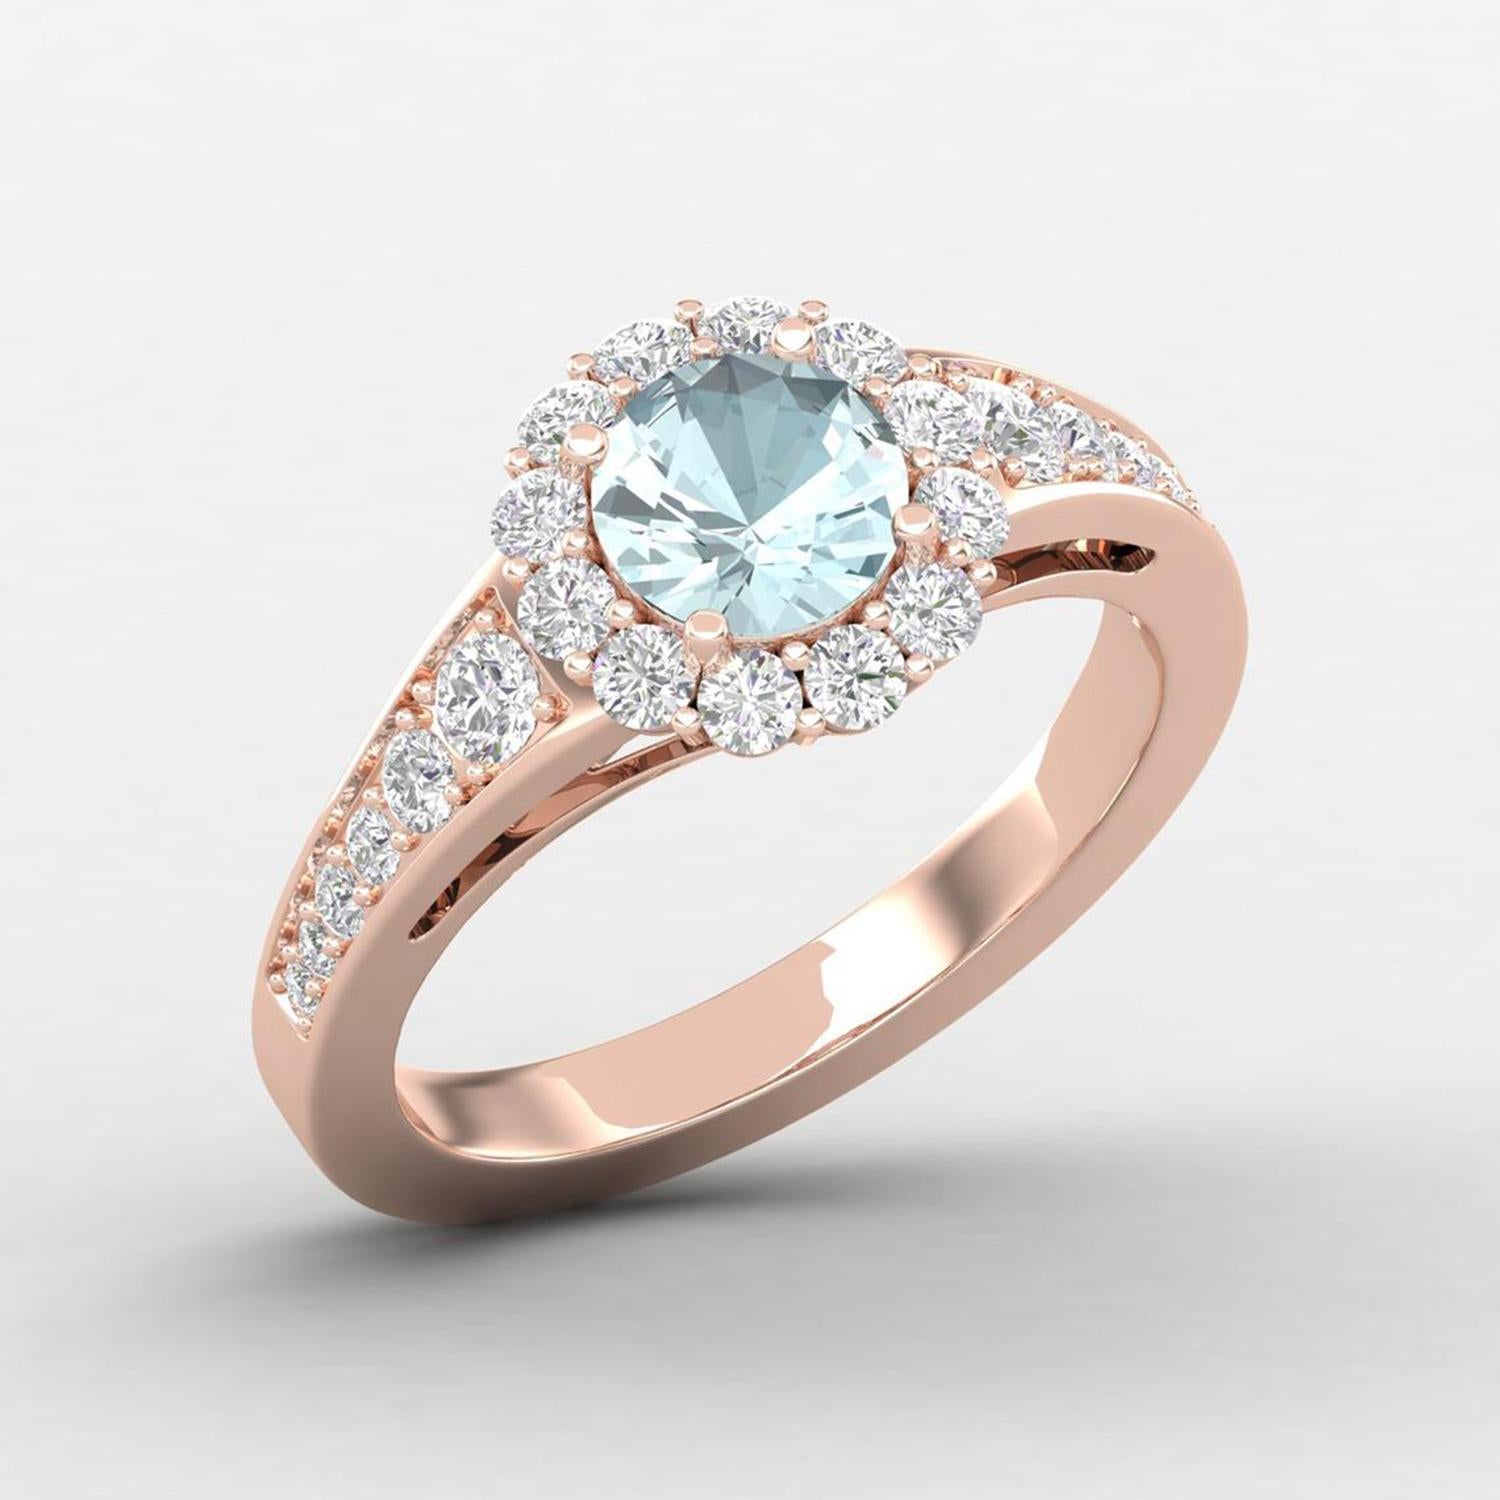 14 Karat Gold Aquamarine Ring / Round Diamond Ring / Solitaire Ring In New Condition For Sale In Jaipur, RJ